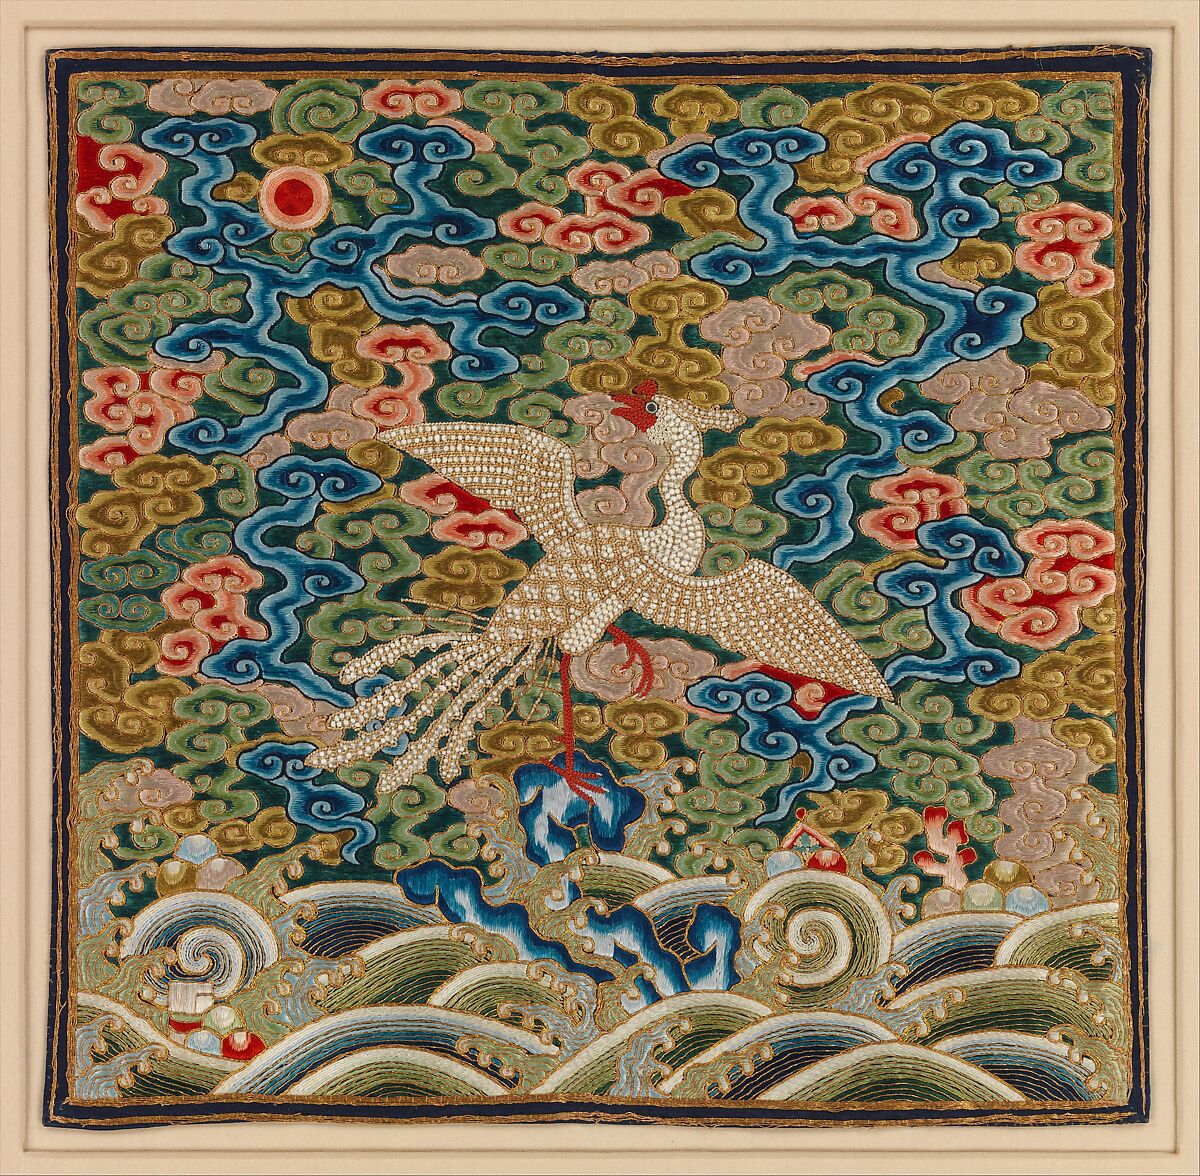 Rank Badge with Silver Pheasant, Silk, pearls, and metallic thread embroidery on silk satin, China 